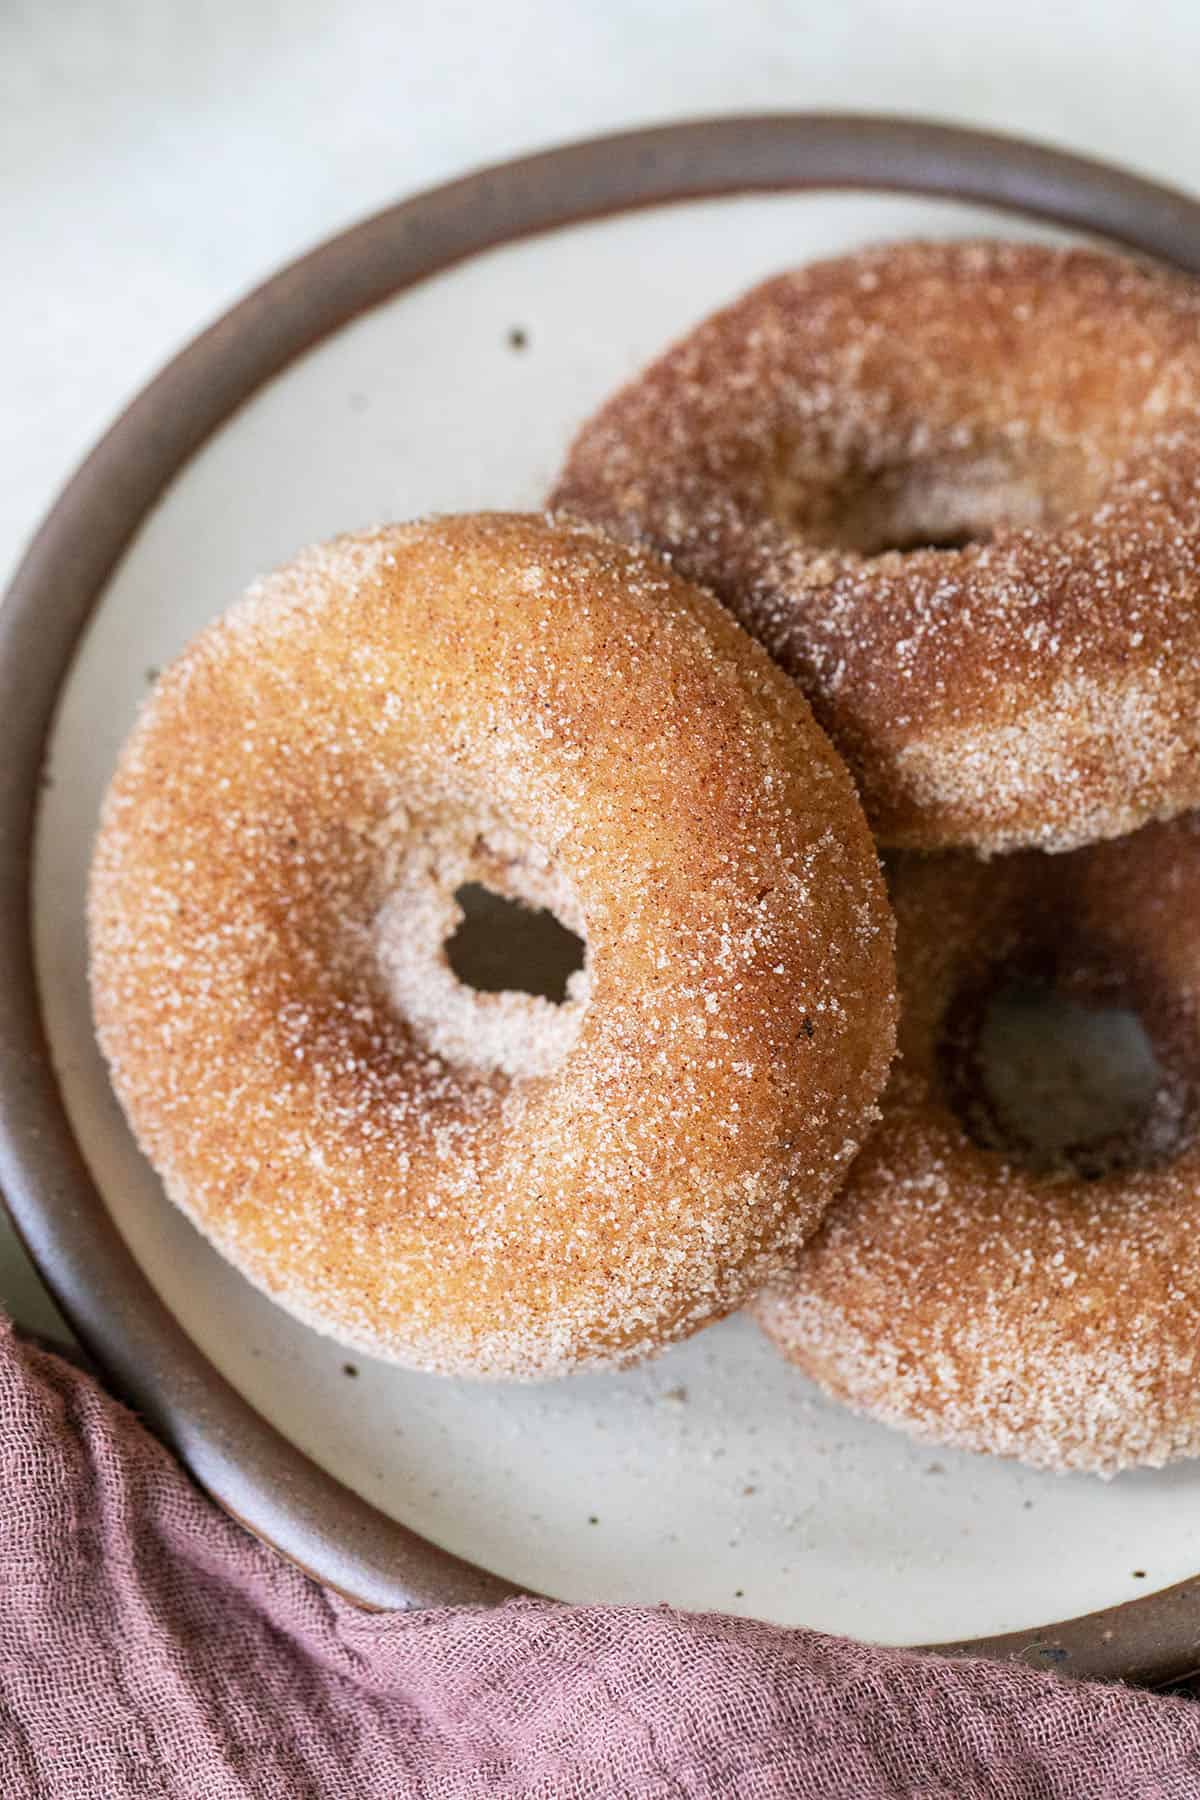 baked apple cider donuts with sugar.